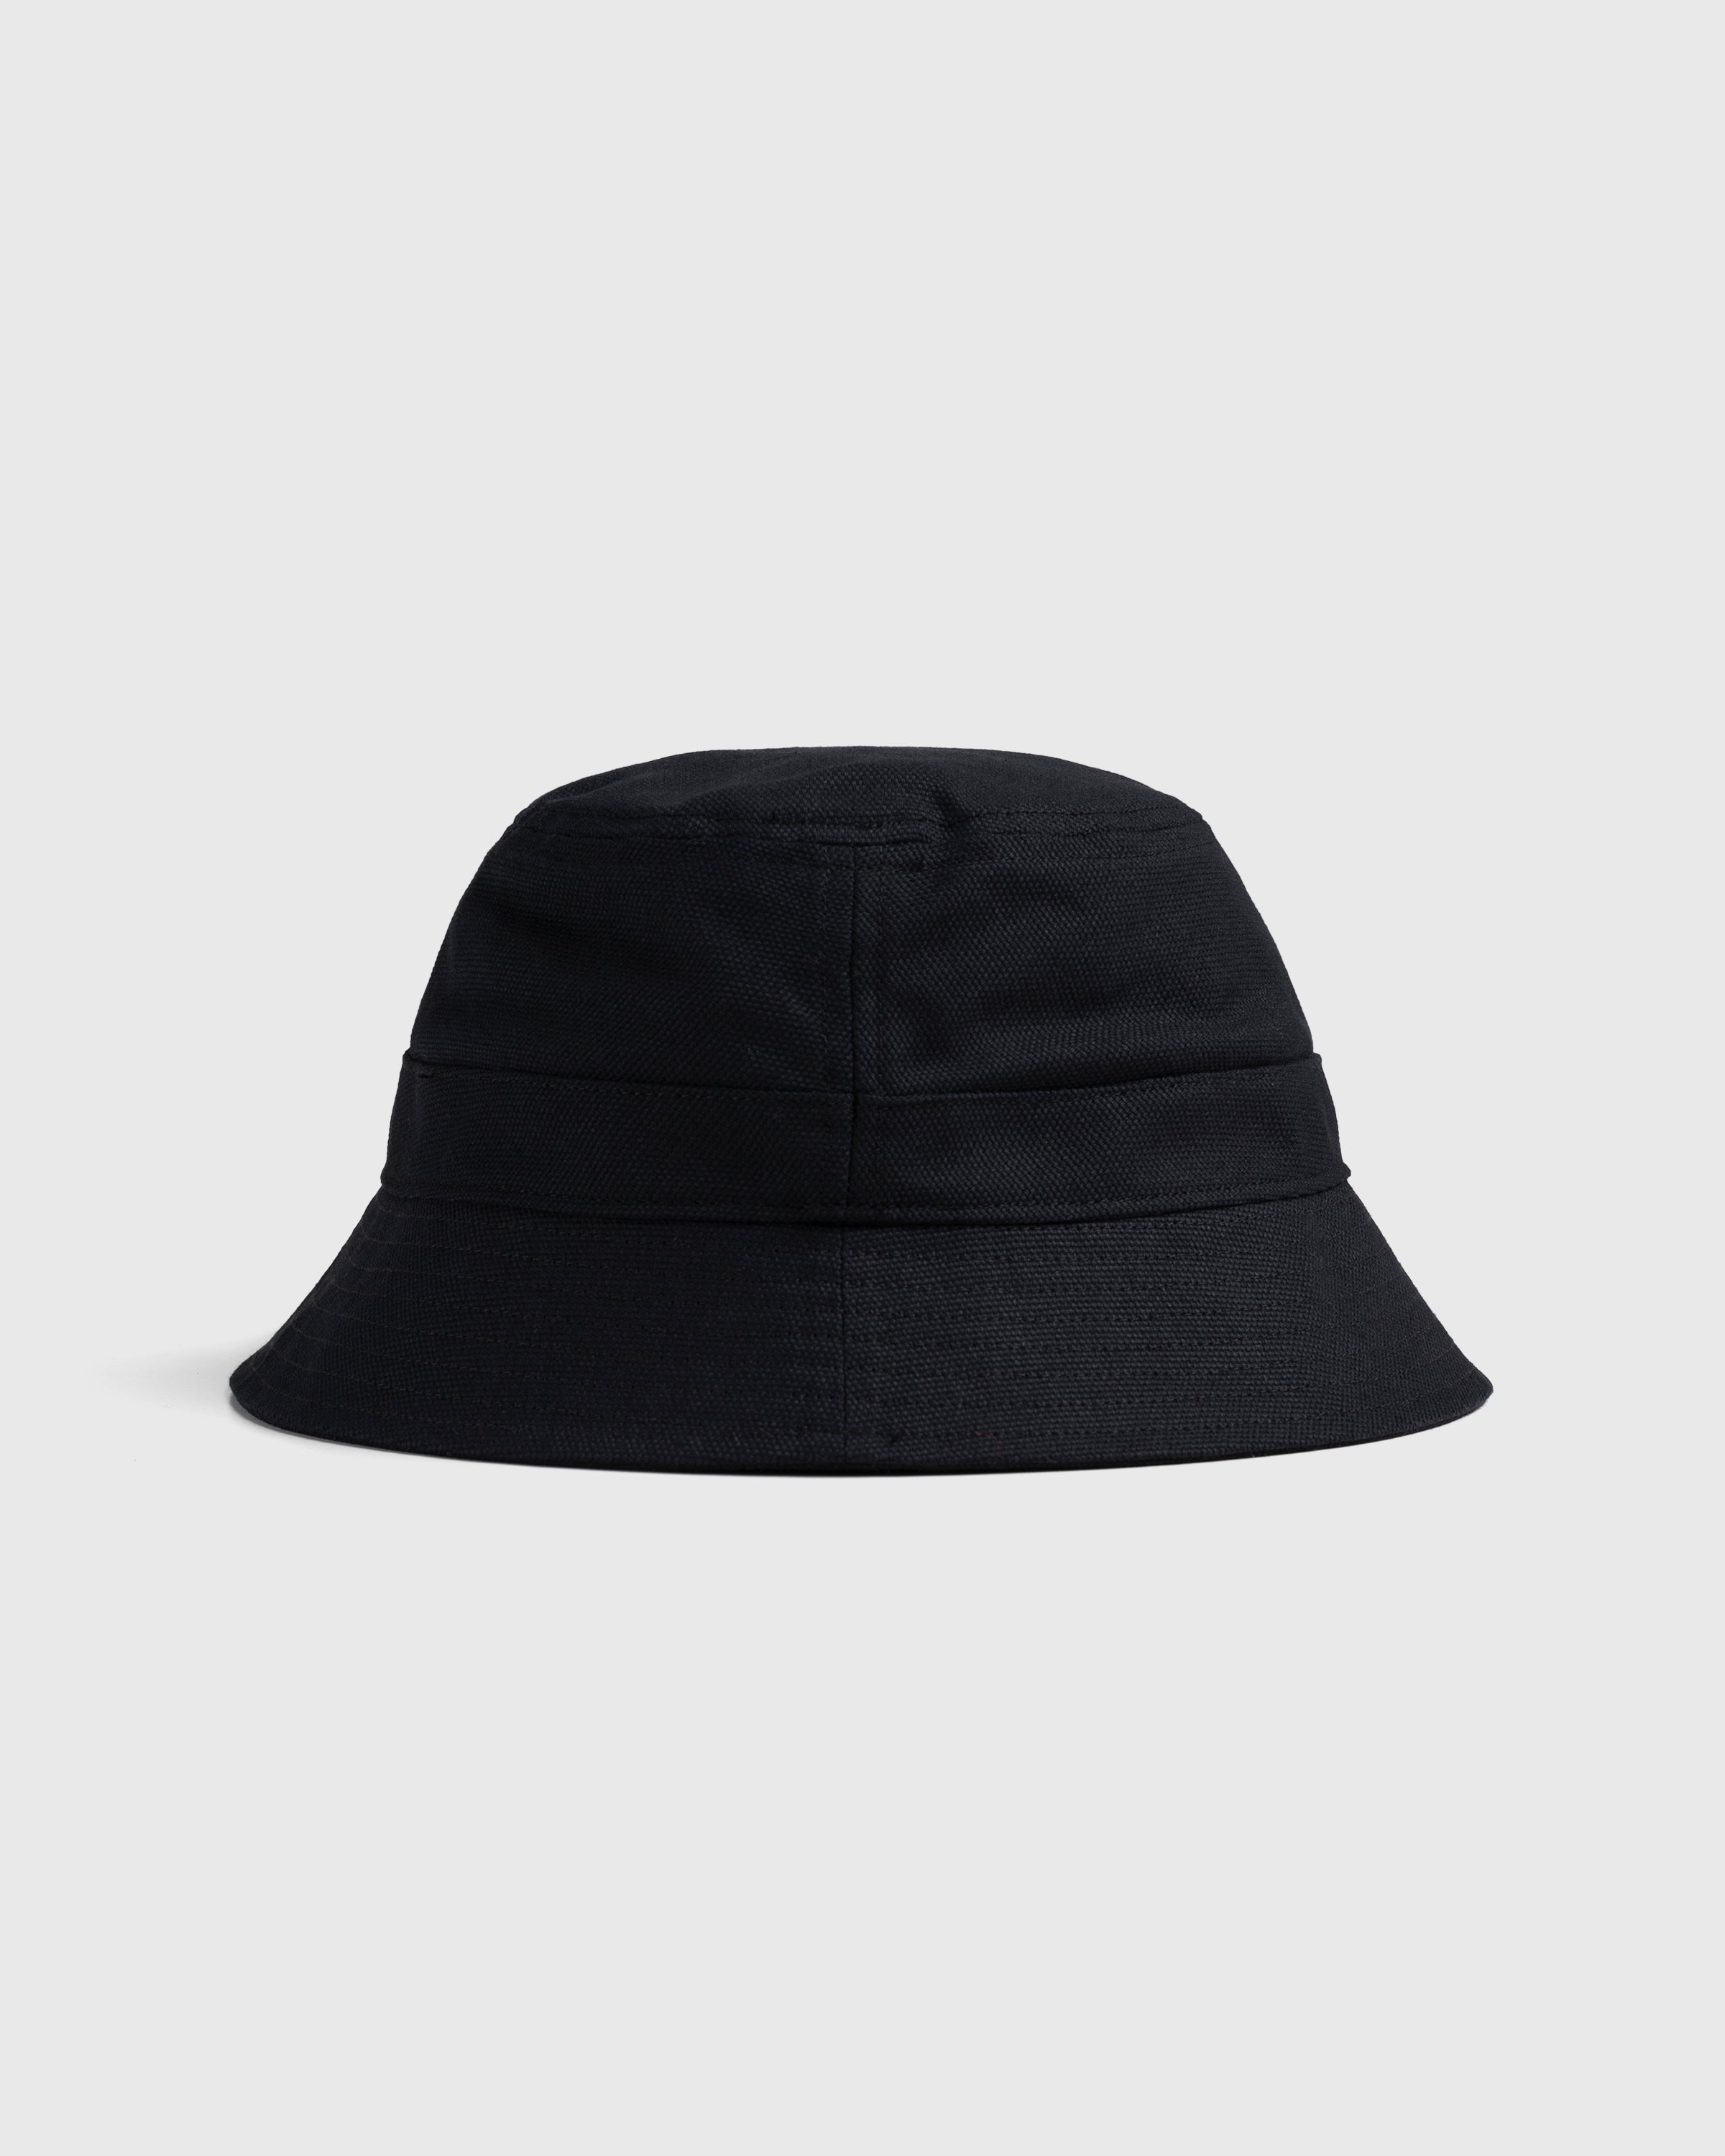 The North Face - Mountain Bucket Hat TNF Black - Accessories - Black - Image 2